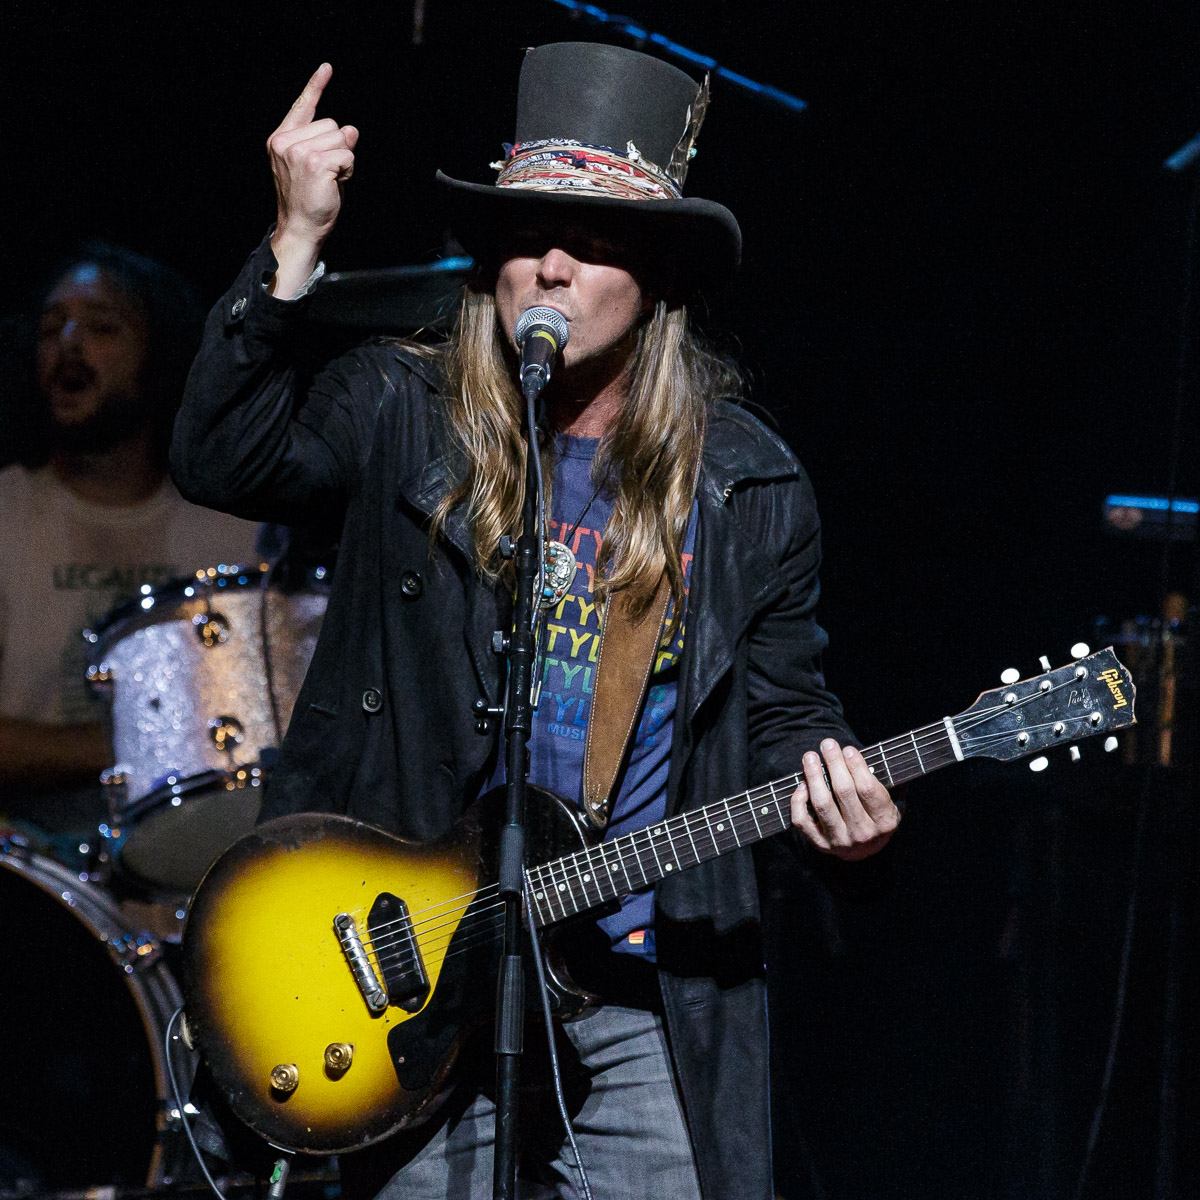 ACL Review: Lukas Nelson: Willies kid proves his own 